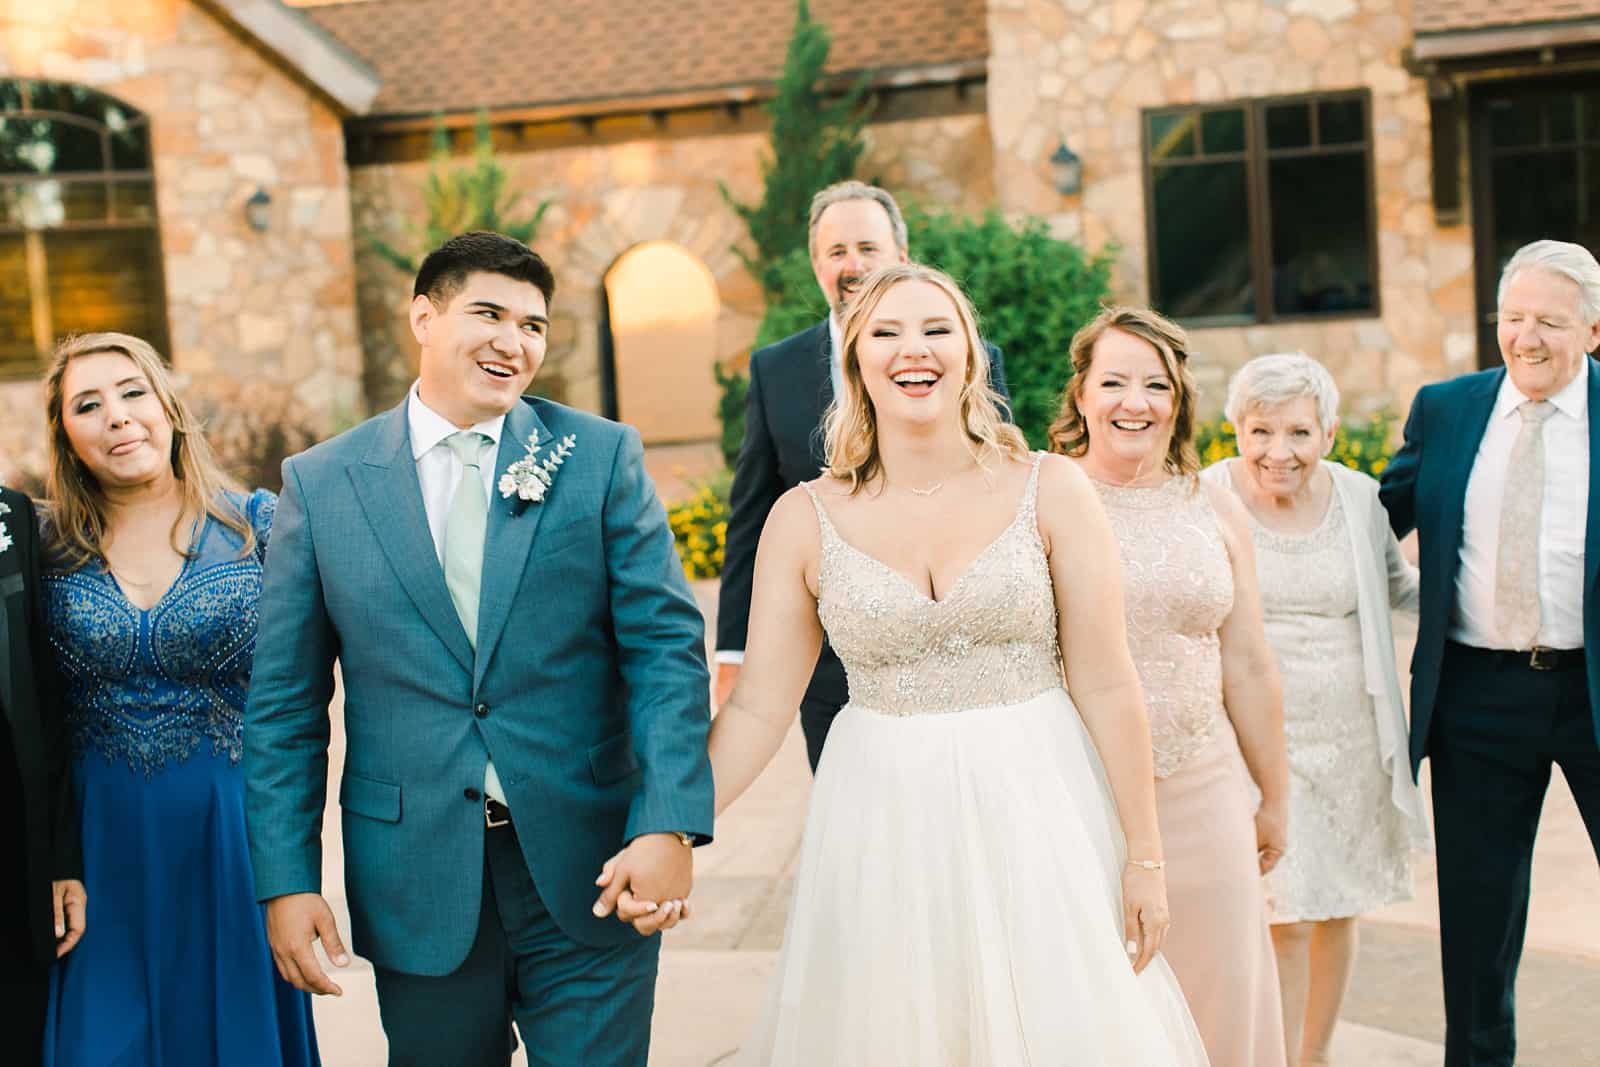 Bride and groom laughing with family